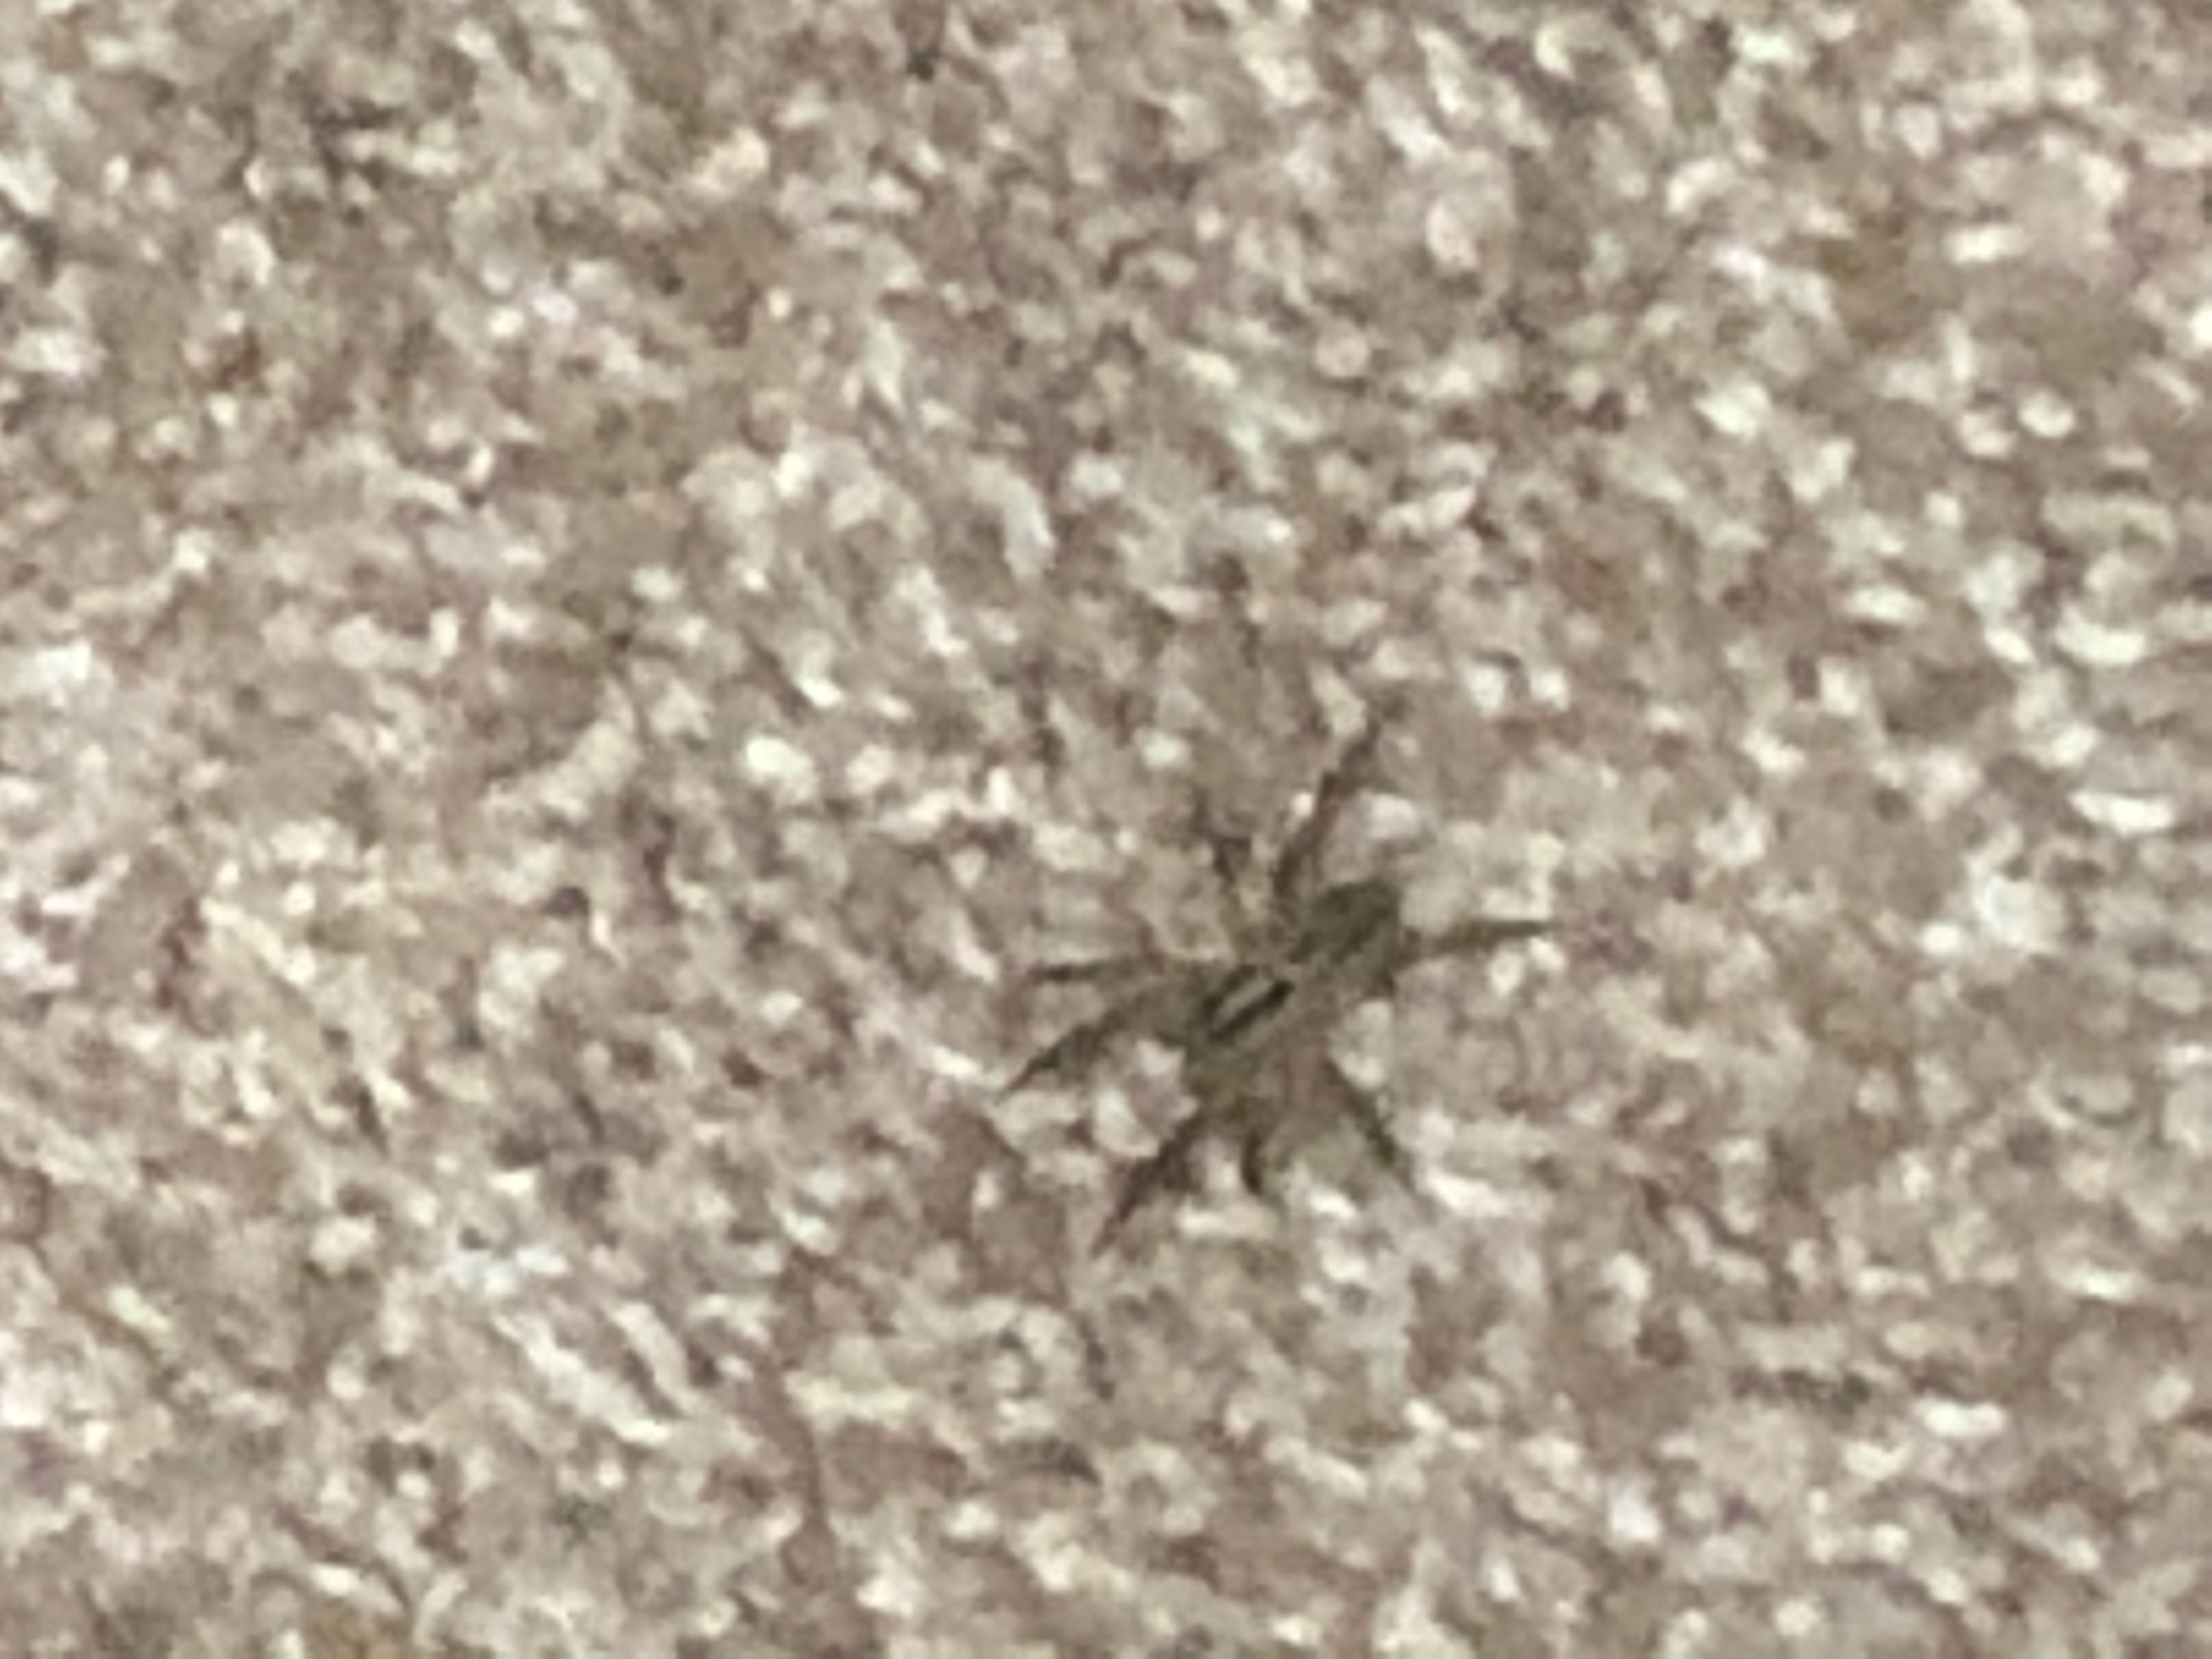 Unidentified spider in Katy, Texas United States